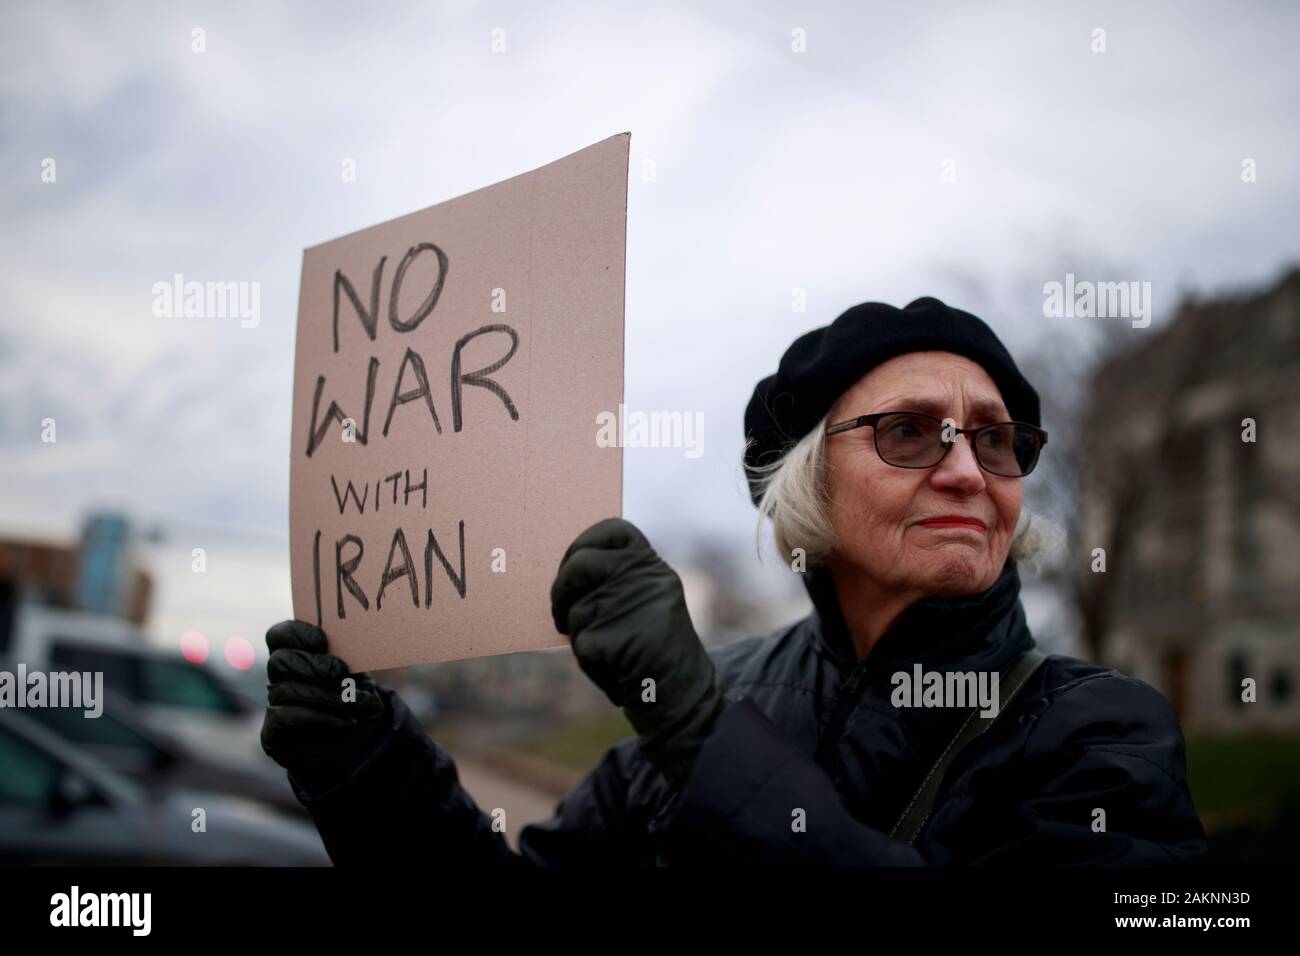 Anti-war protesters stand on the steps of the Monroe Courthouse Square in Bloomington, Indiana to protest against the potential for a war between the United States, and Iran, Thursday, January 9, 2019 in Bloomington, Ind. The United States killed an Iranian general last week, which led to Iran speaking of revenge against the United States, and firing rockets at an American base in Iraq. (Photo by Jeremy Hogan/The Bloomingtonian) Stock Photo